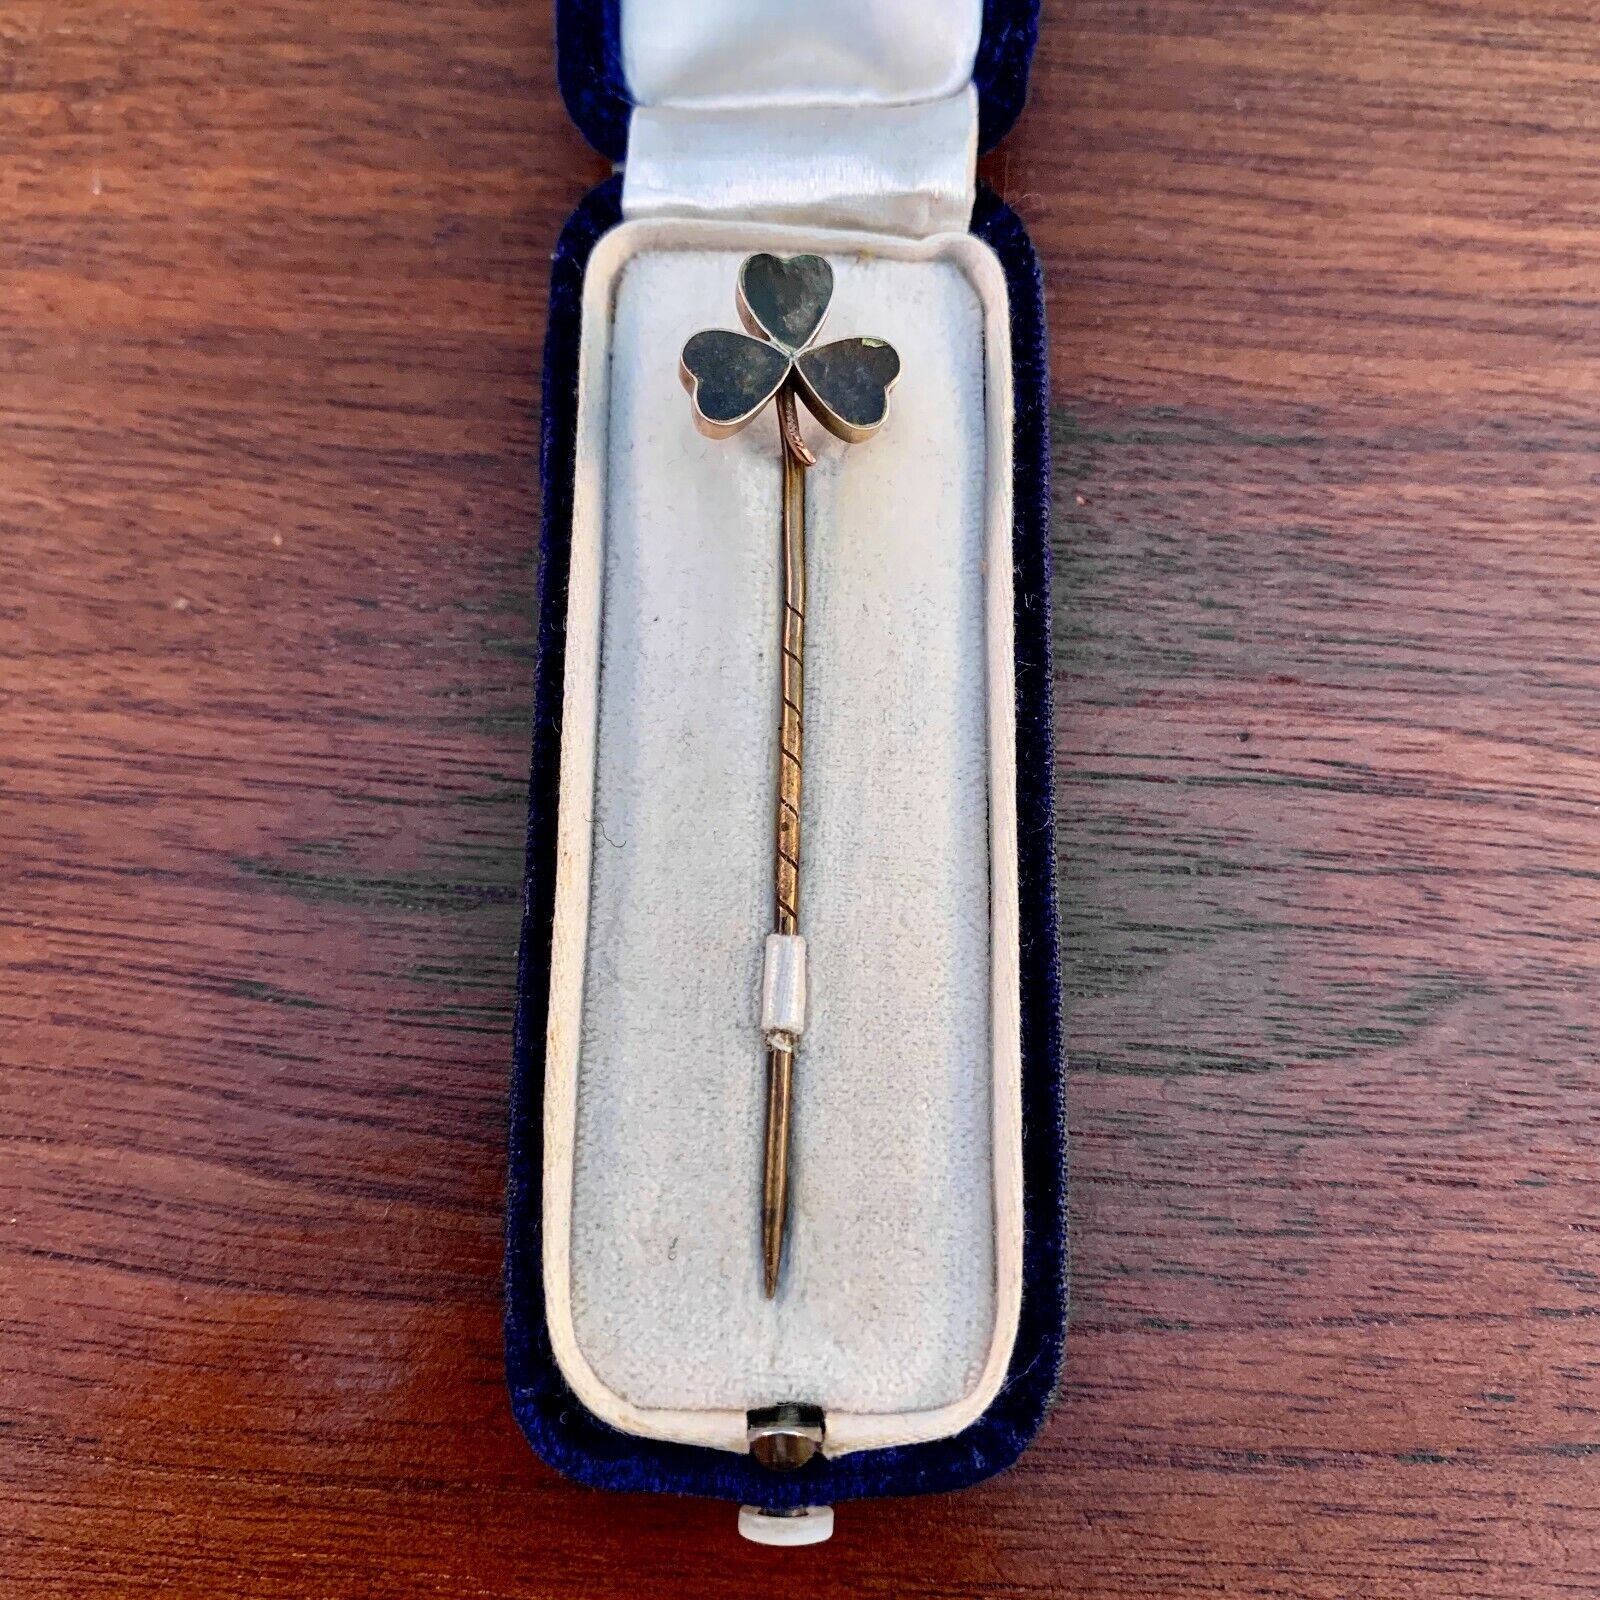 EARLY WILLIAM HENRY TOYE ENGLISH 9CT GOLD STICK PIN: LARGE CLOVER